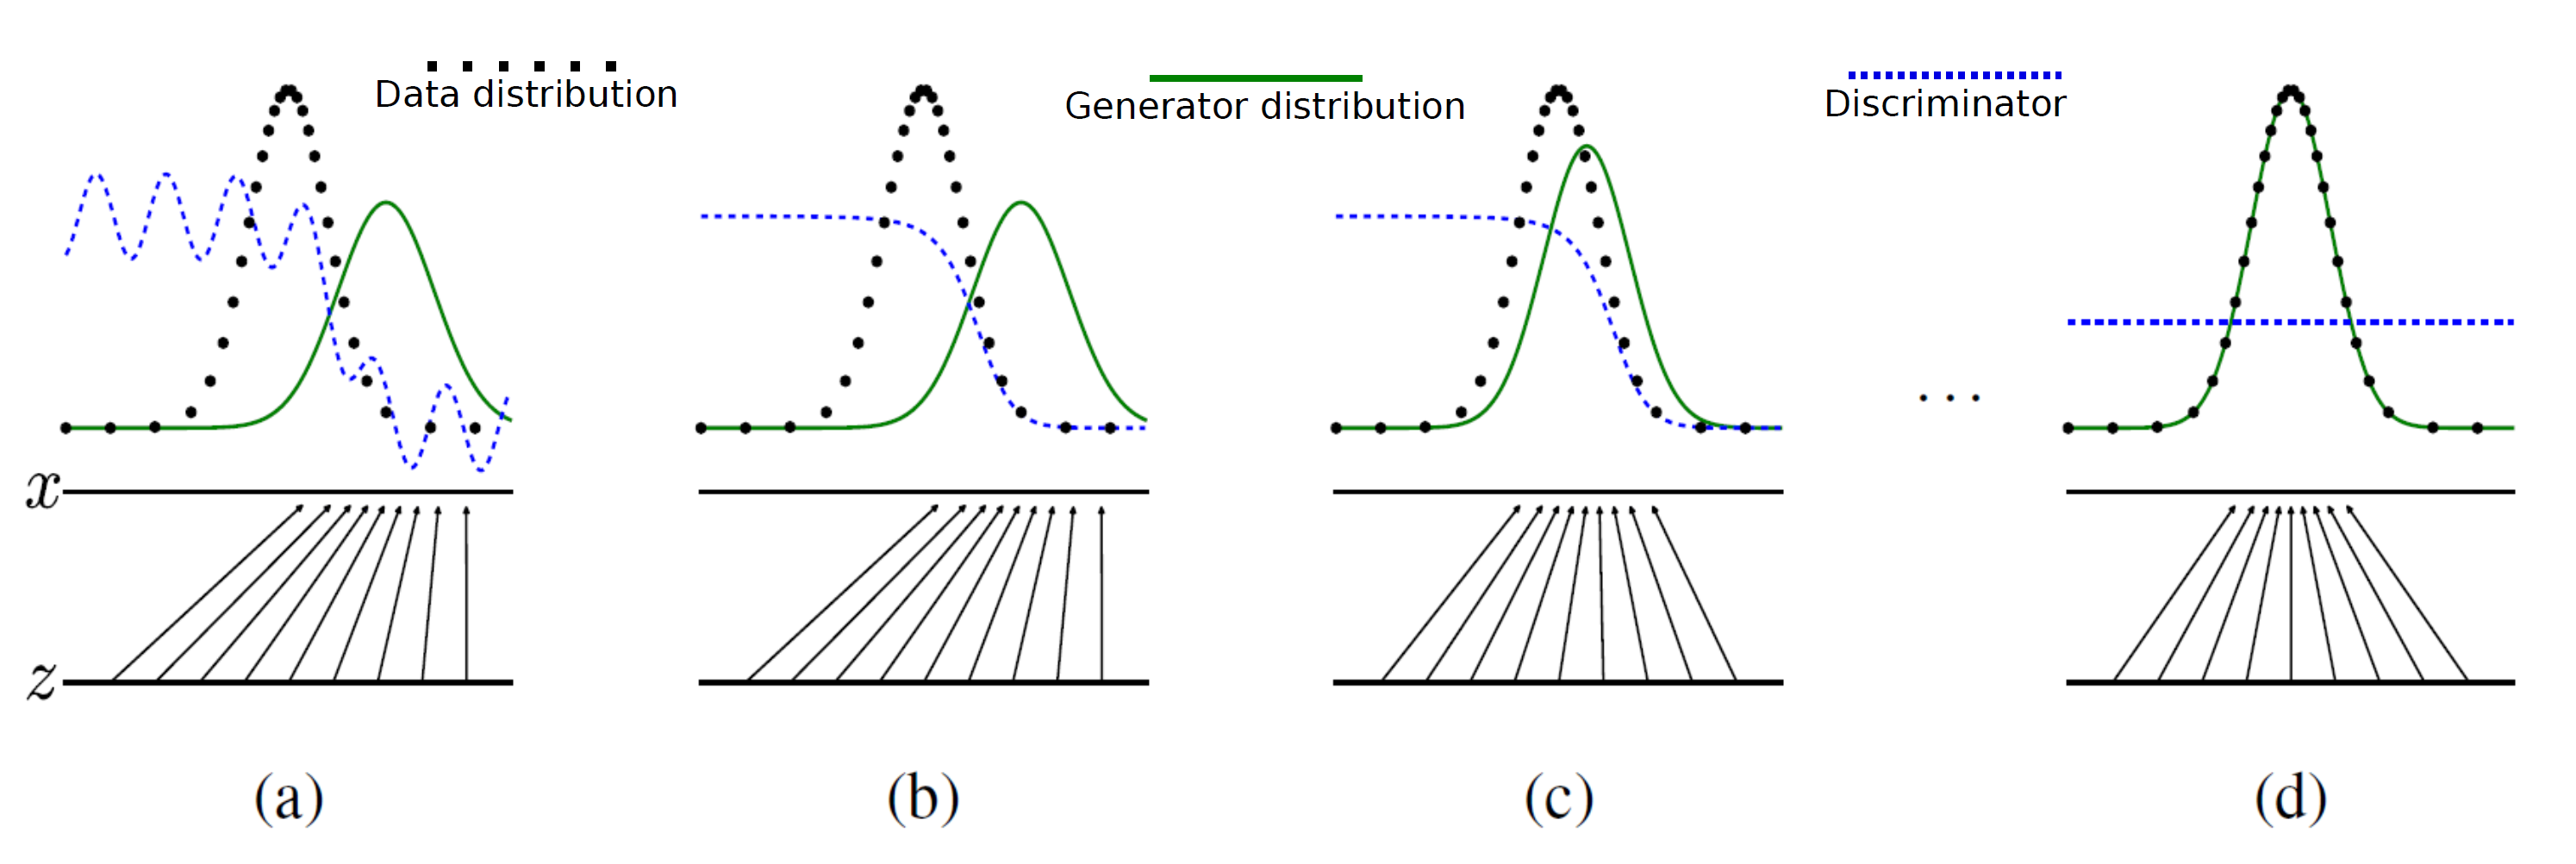 GAN’s training visualization: the dotted black, solid green lines represents pd and pθ respectively. The discriminator distribution is shown in dotted blue. This image taken from Goodfellow et al.